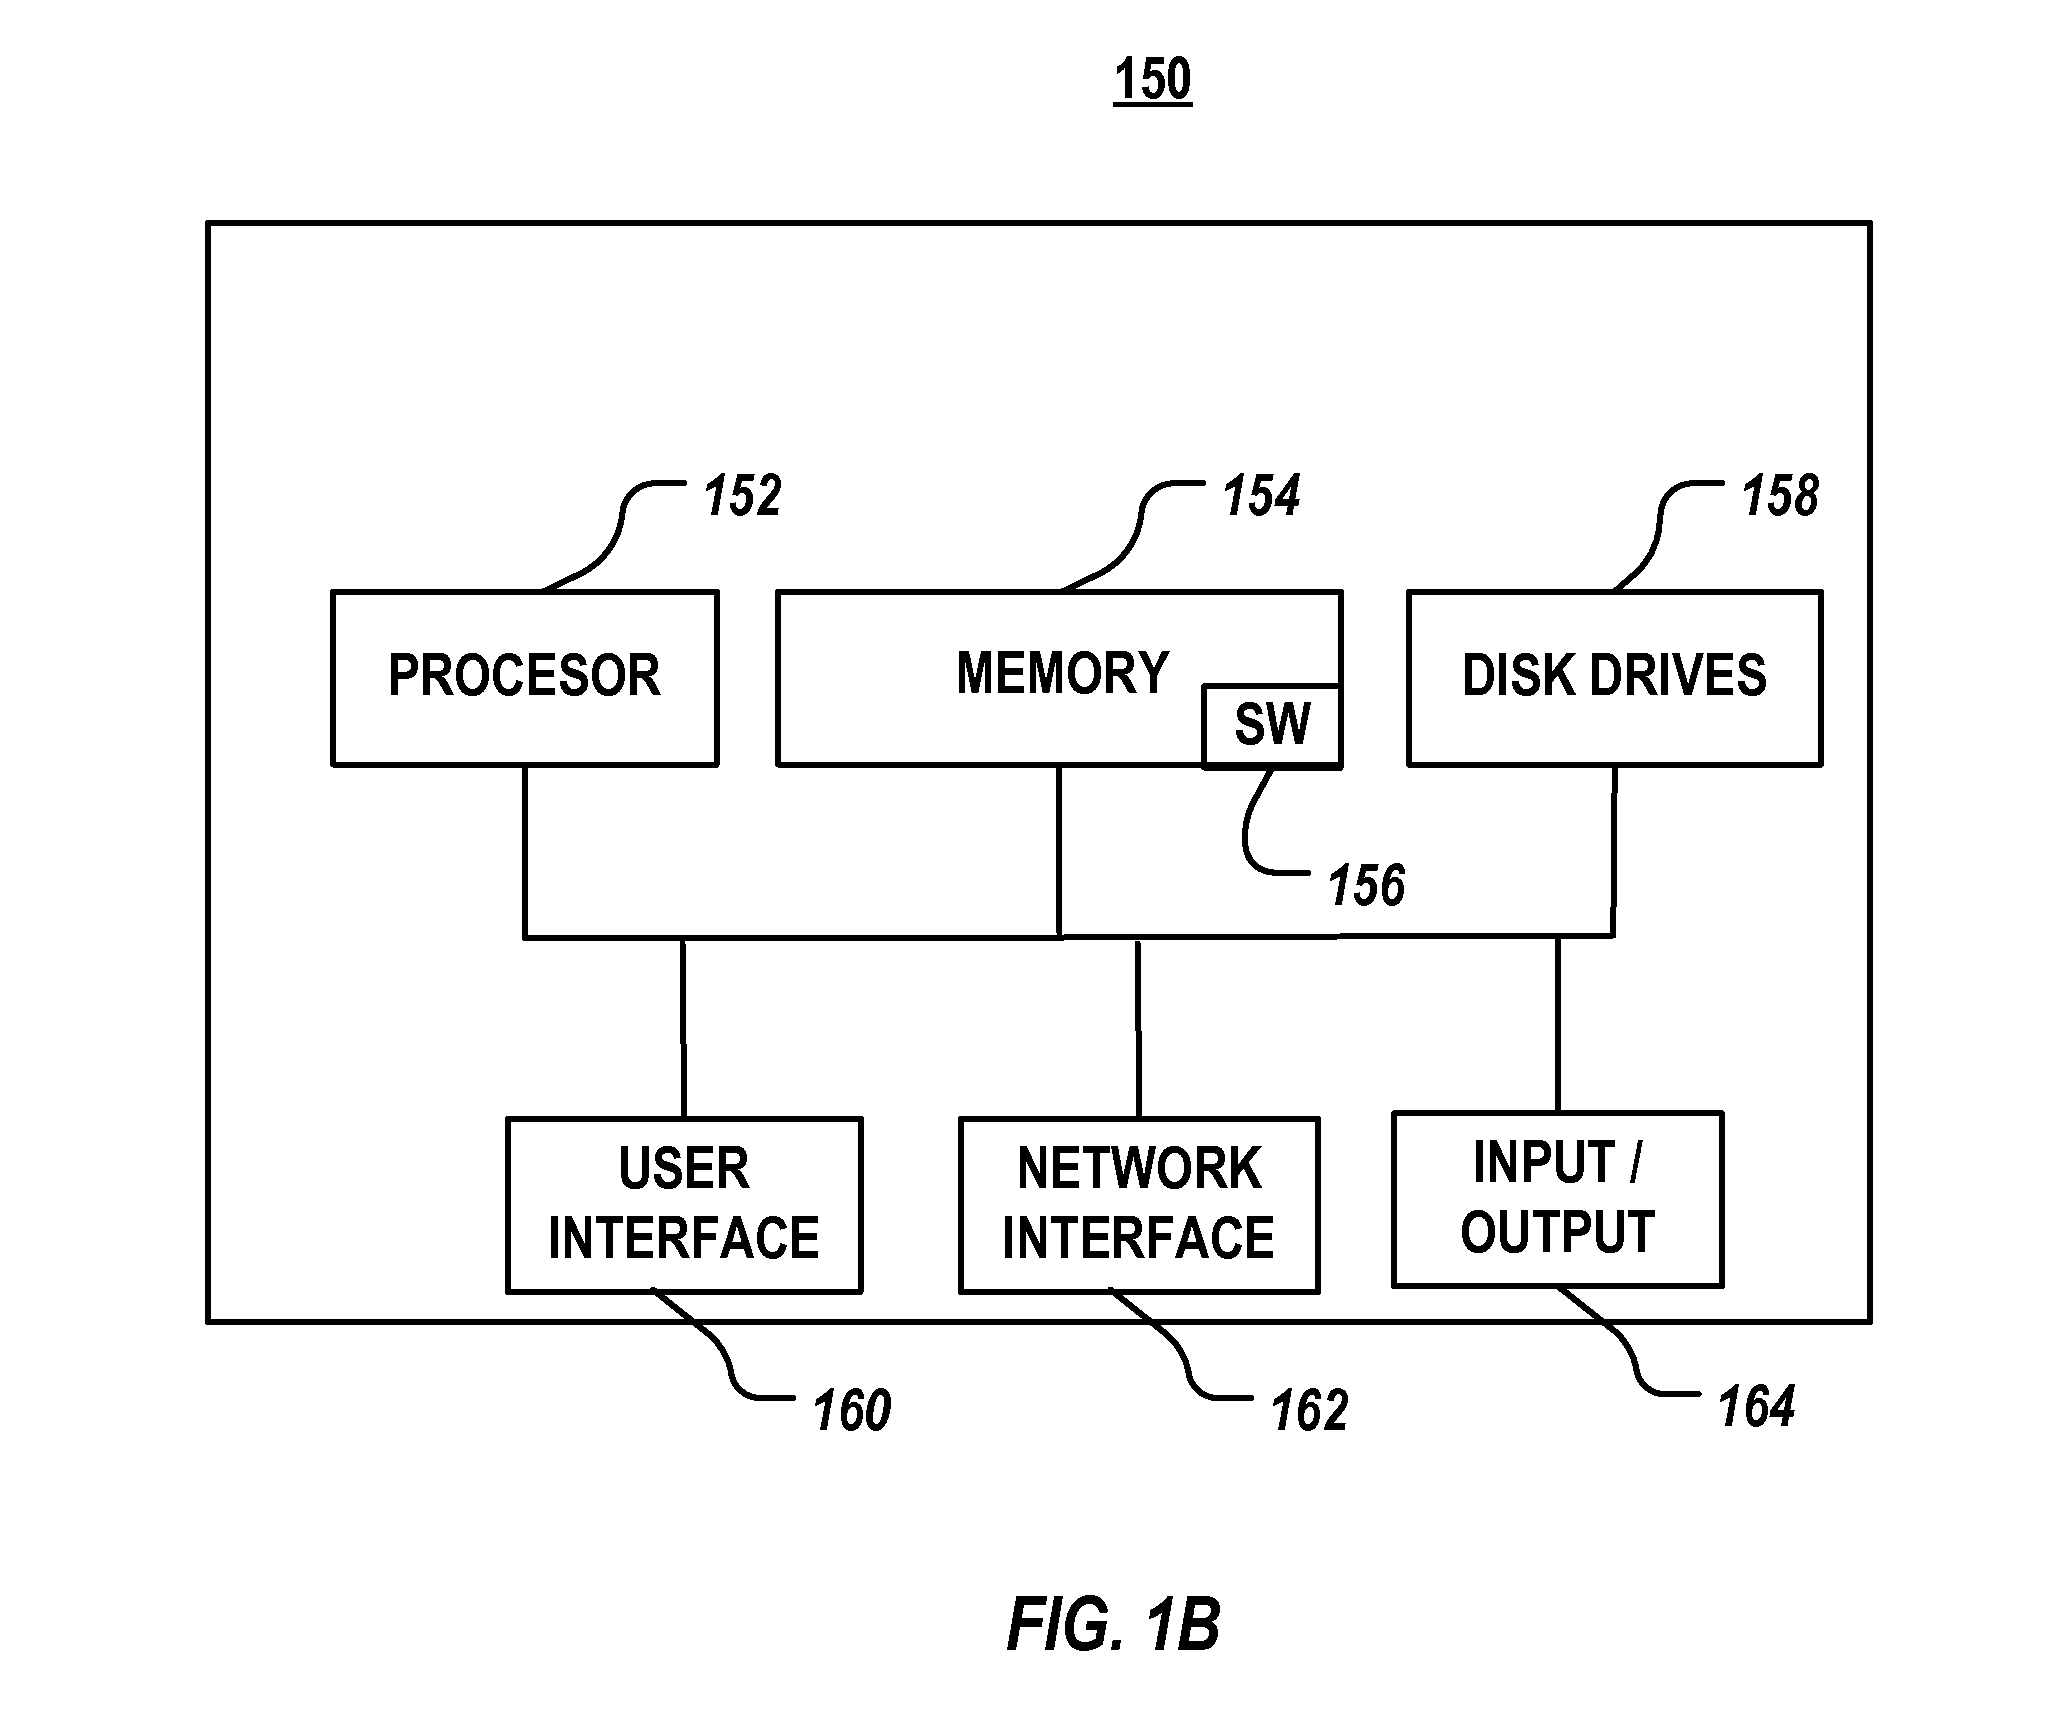 System and Method for Converting AC Power to DC Power Using Sensorless Field Oriented Control